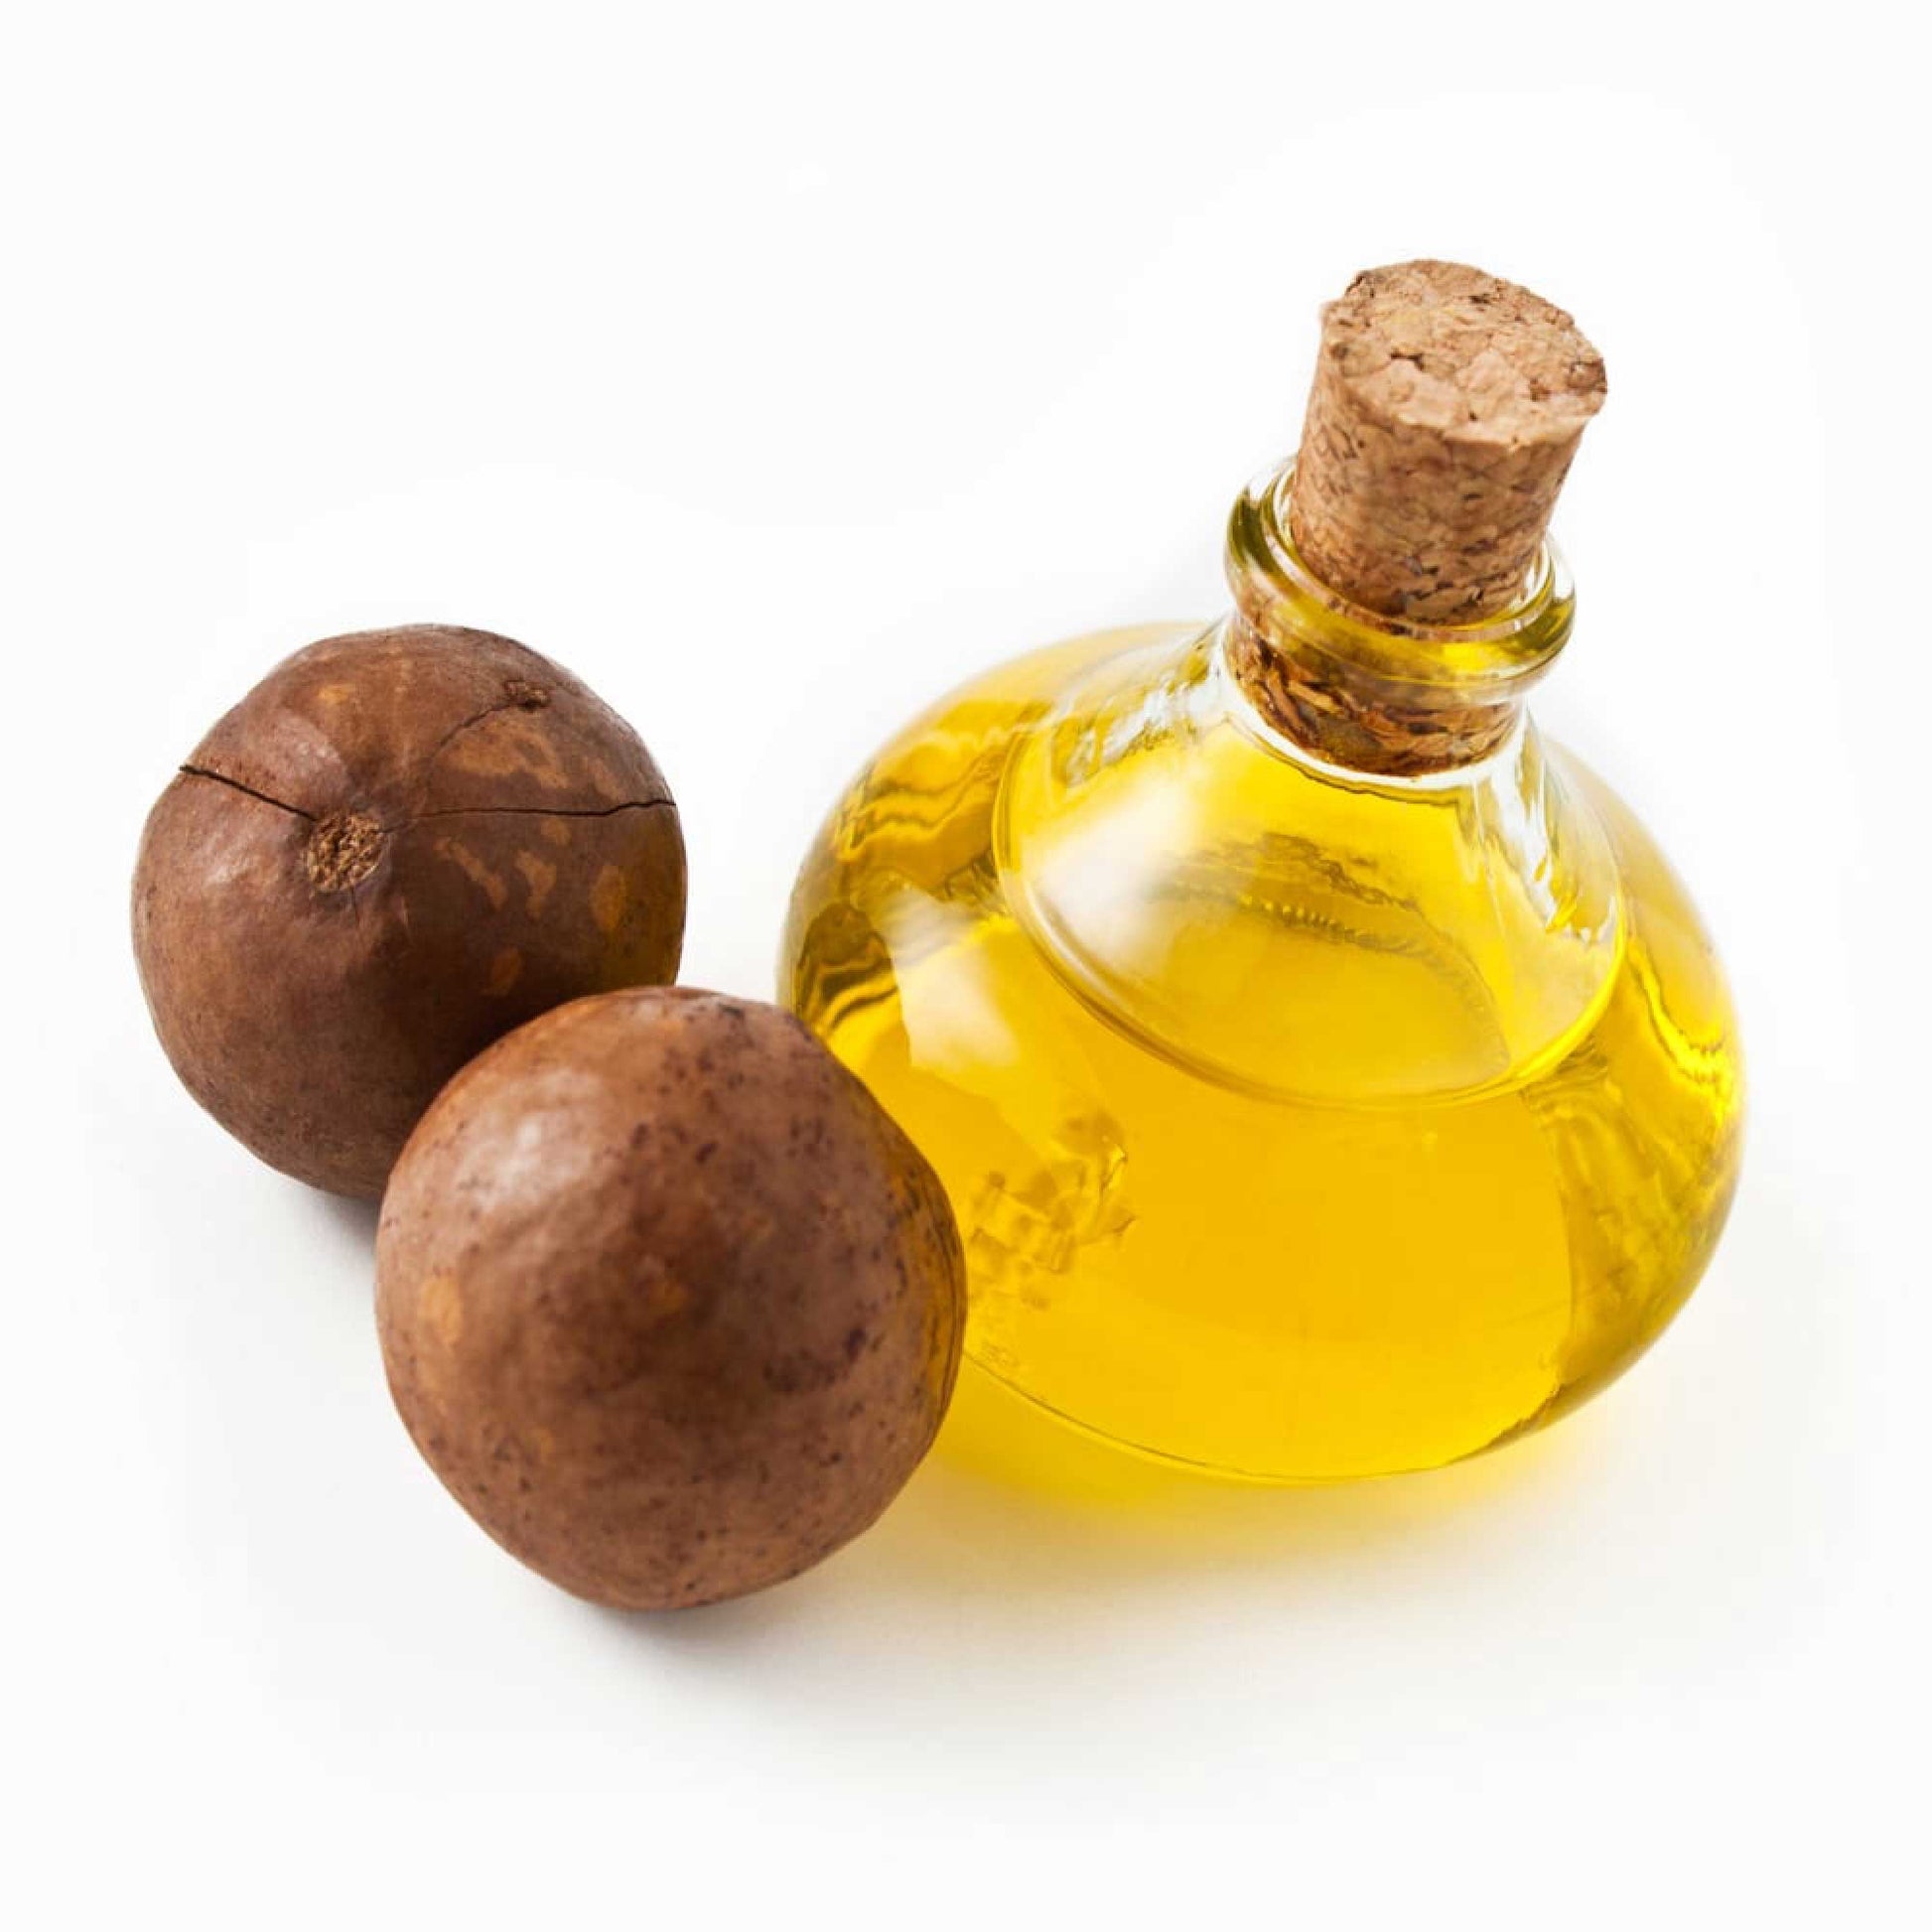 1L Macadamia Oil - Natural Cold Pressed Food Grade 100% Pure Cooking Oils